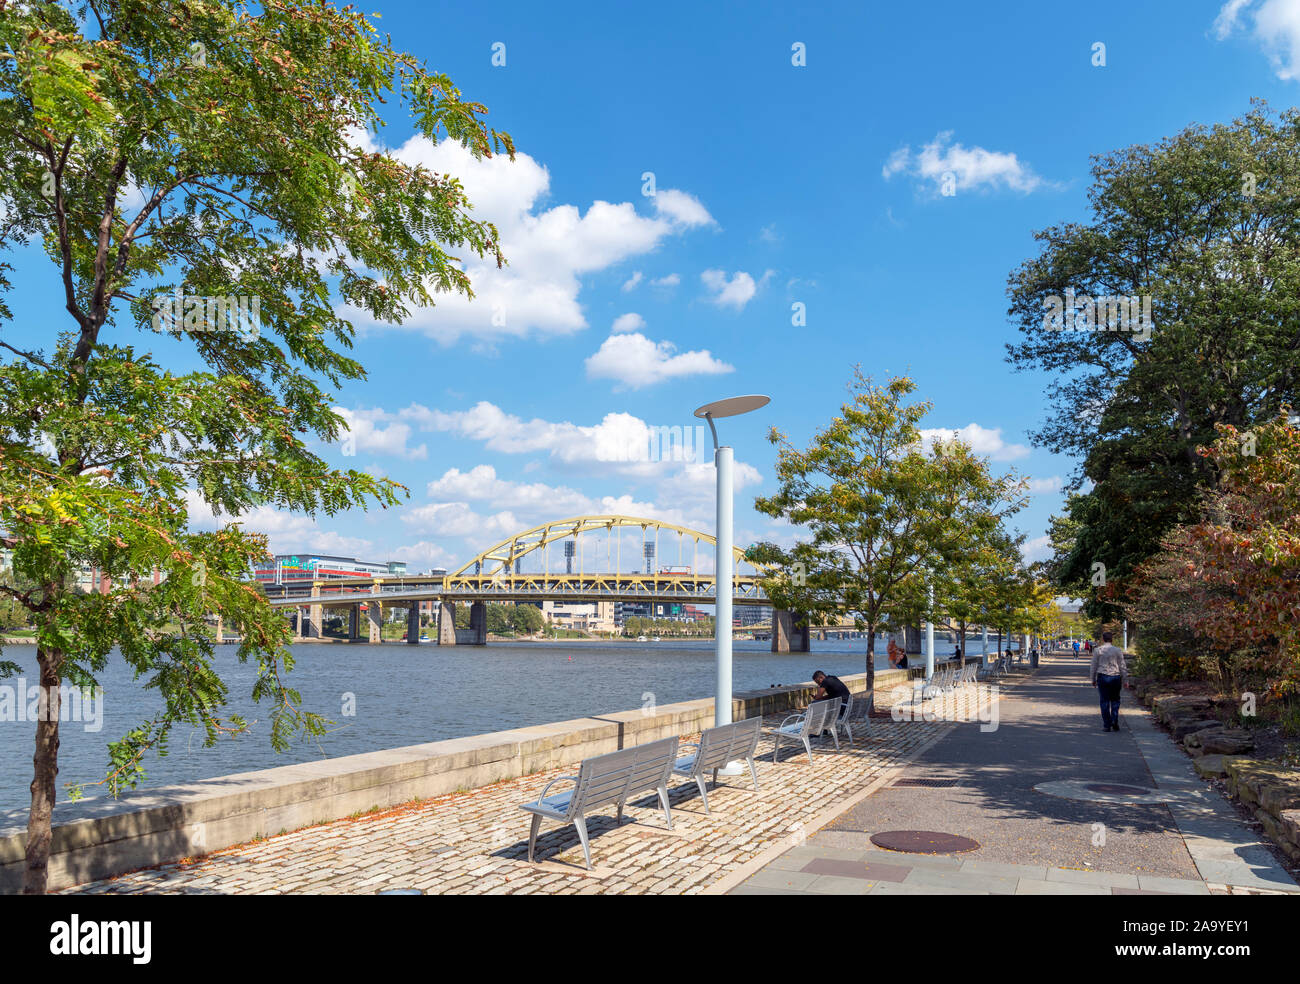 The Three Rivers Heritage Trail in Point State Park with Fort Duquesne Bridge behind, Allegheny River, Pittsburgh, Pennsylvania, USA Stock Photo